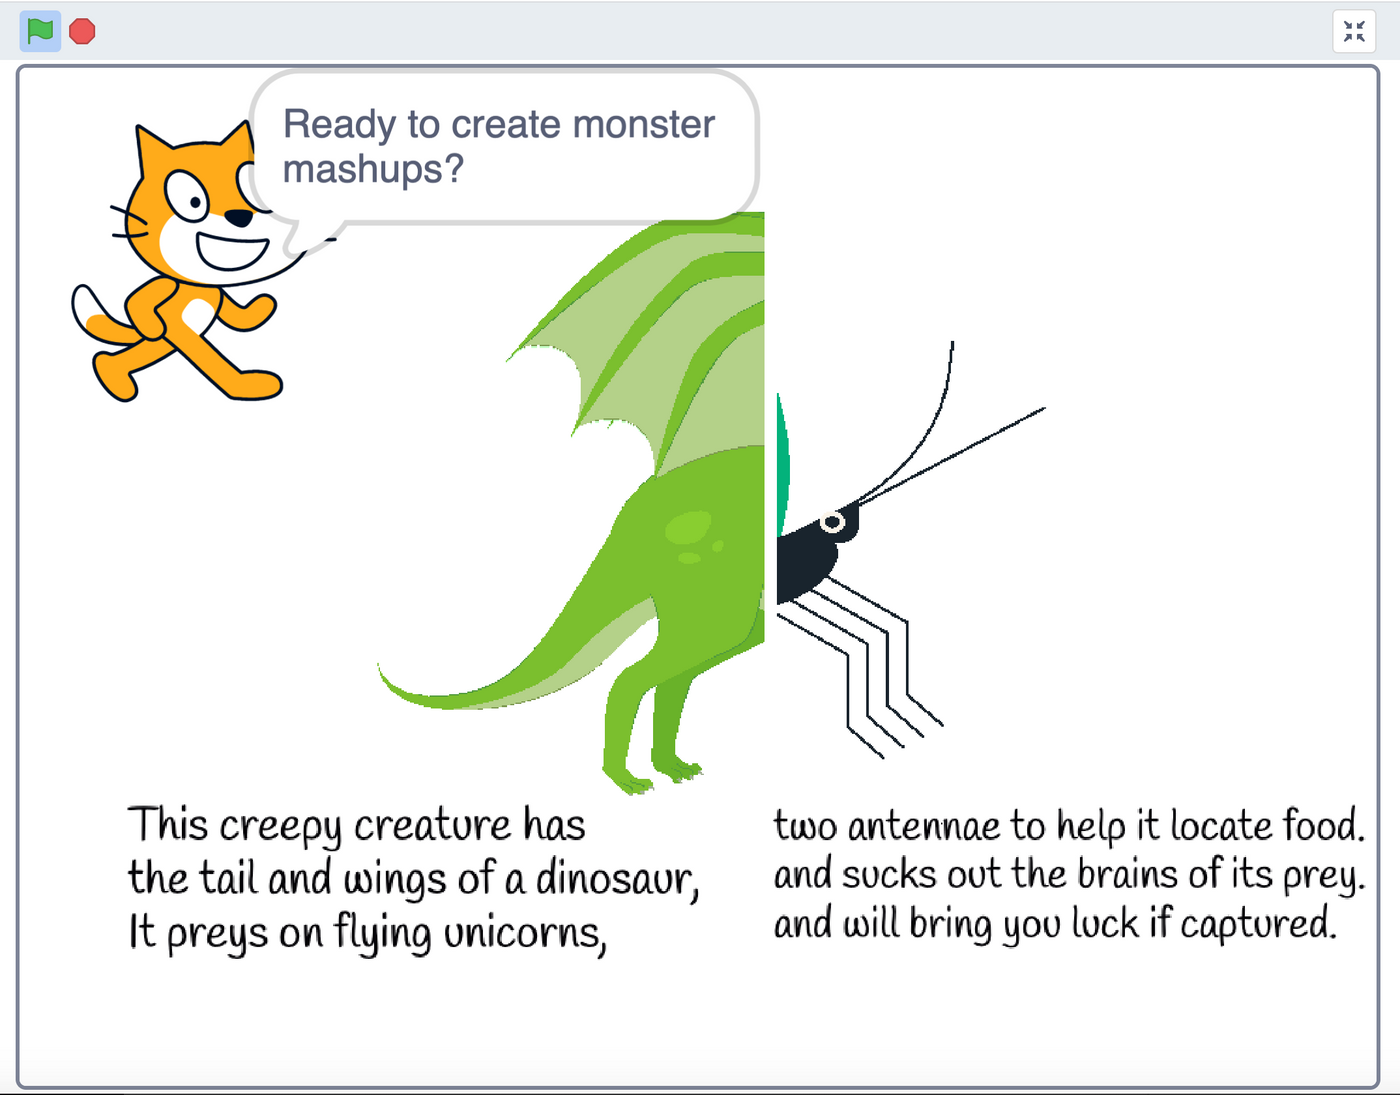 Scratch Coding Literacy Project Ideas for Makey Makey micro:bit Inventions